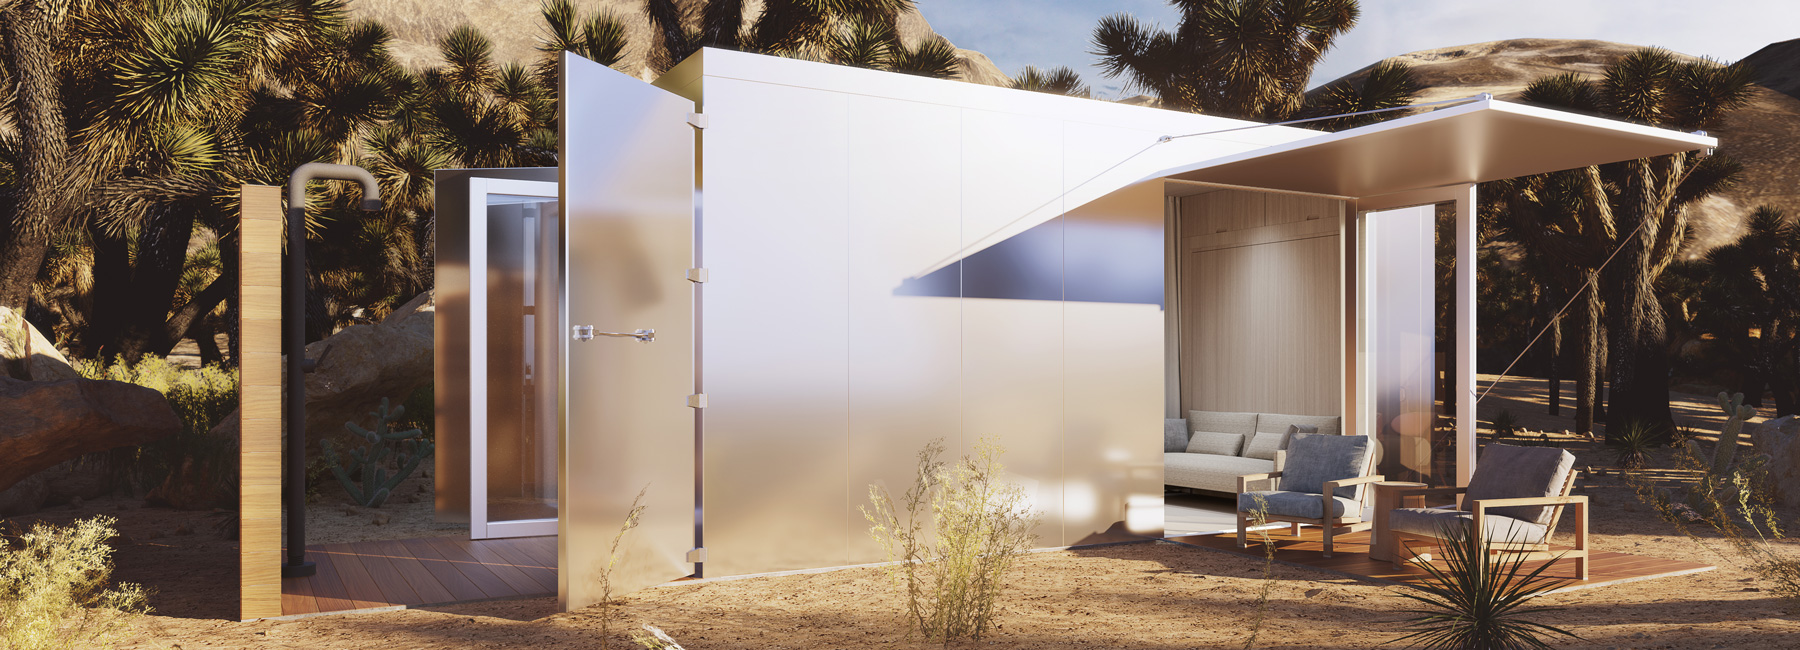 'buhaus' turns shipping containers into fire-resistant temporary housing